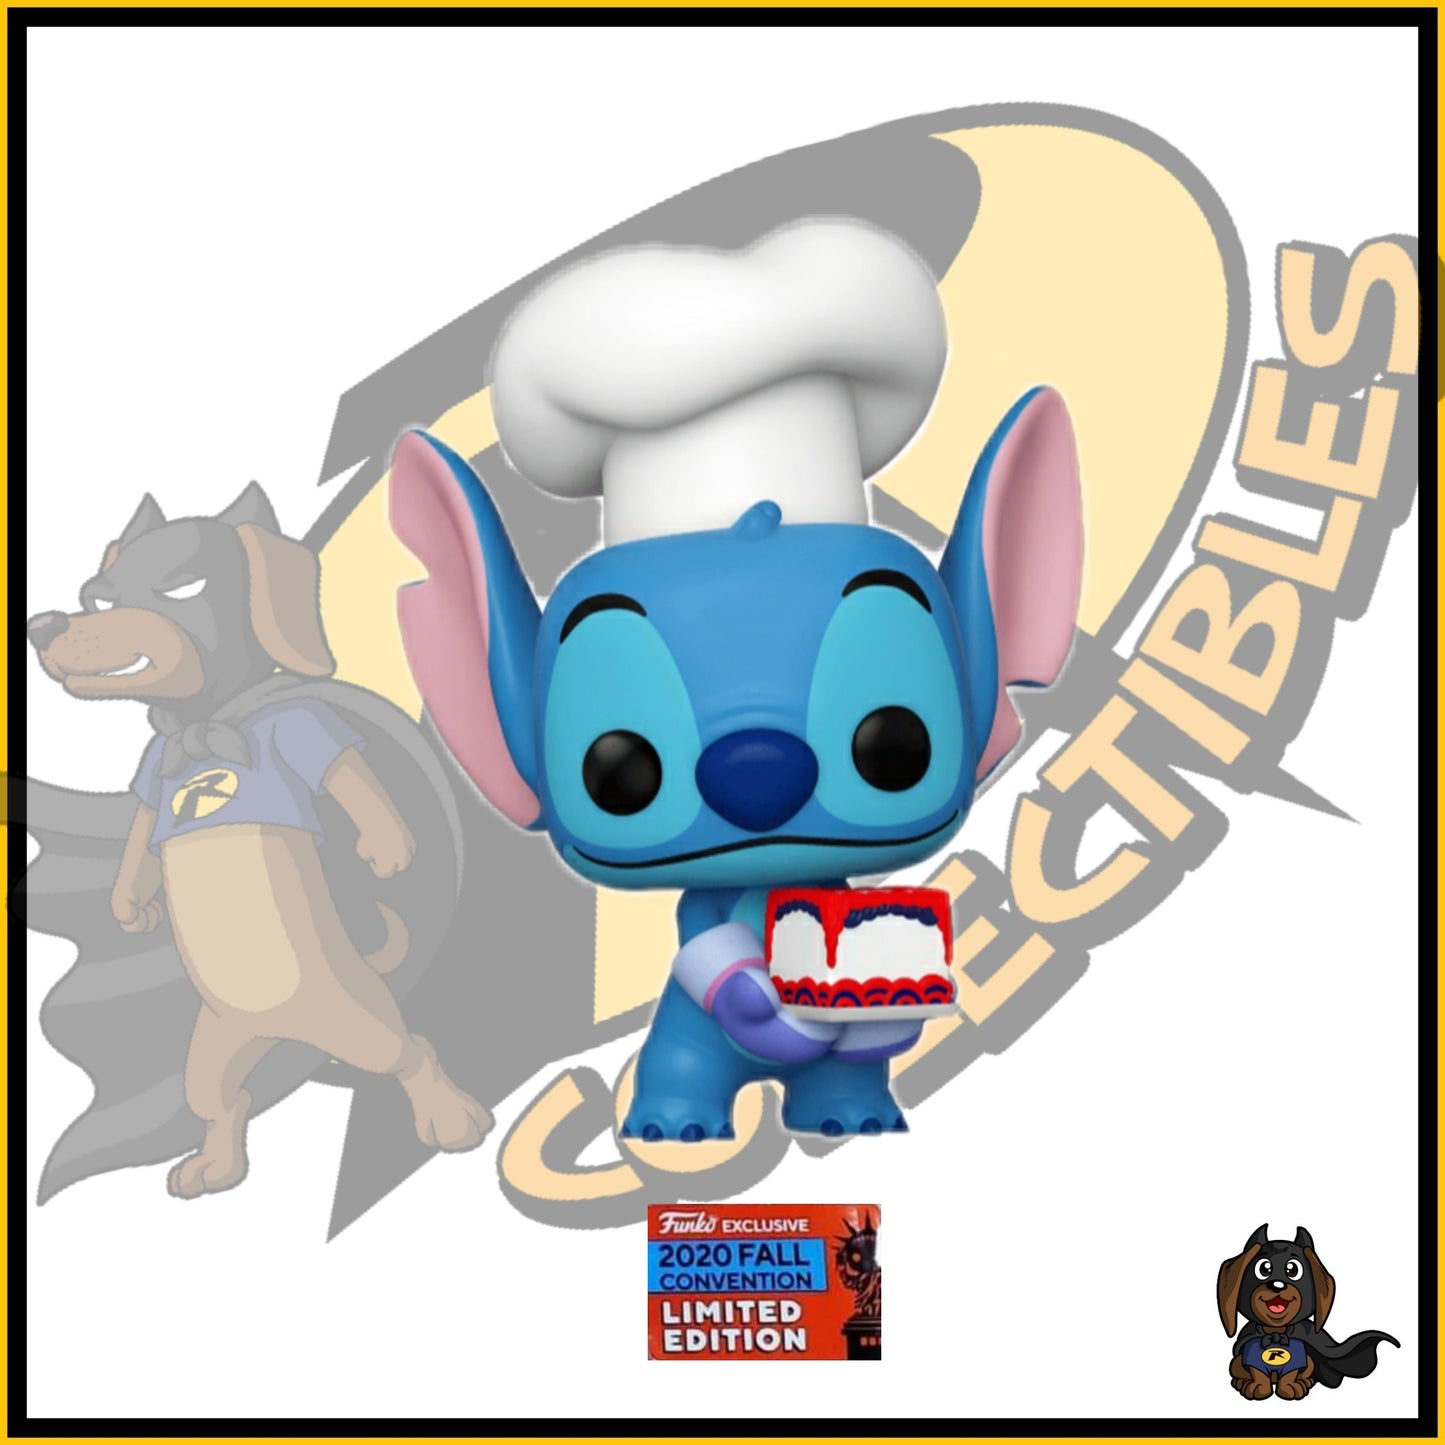 Pre Order Stitch as Baker Fall Convention Exclusive 2020